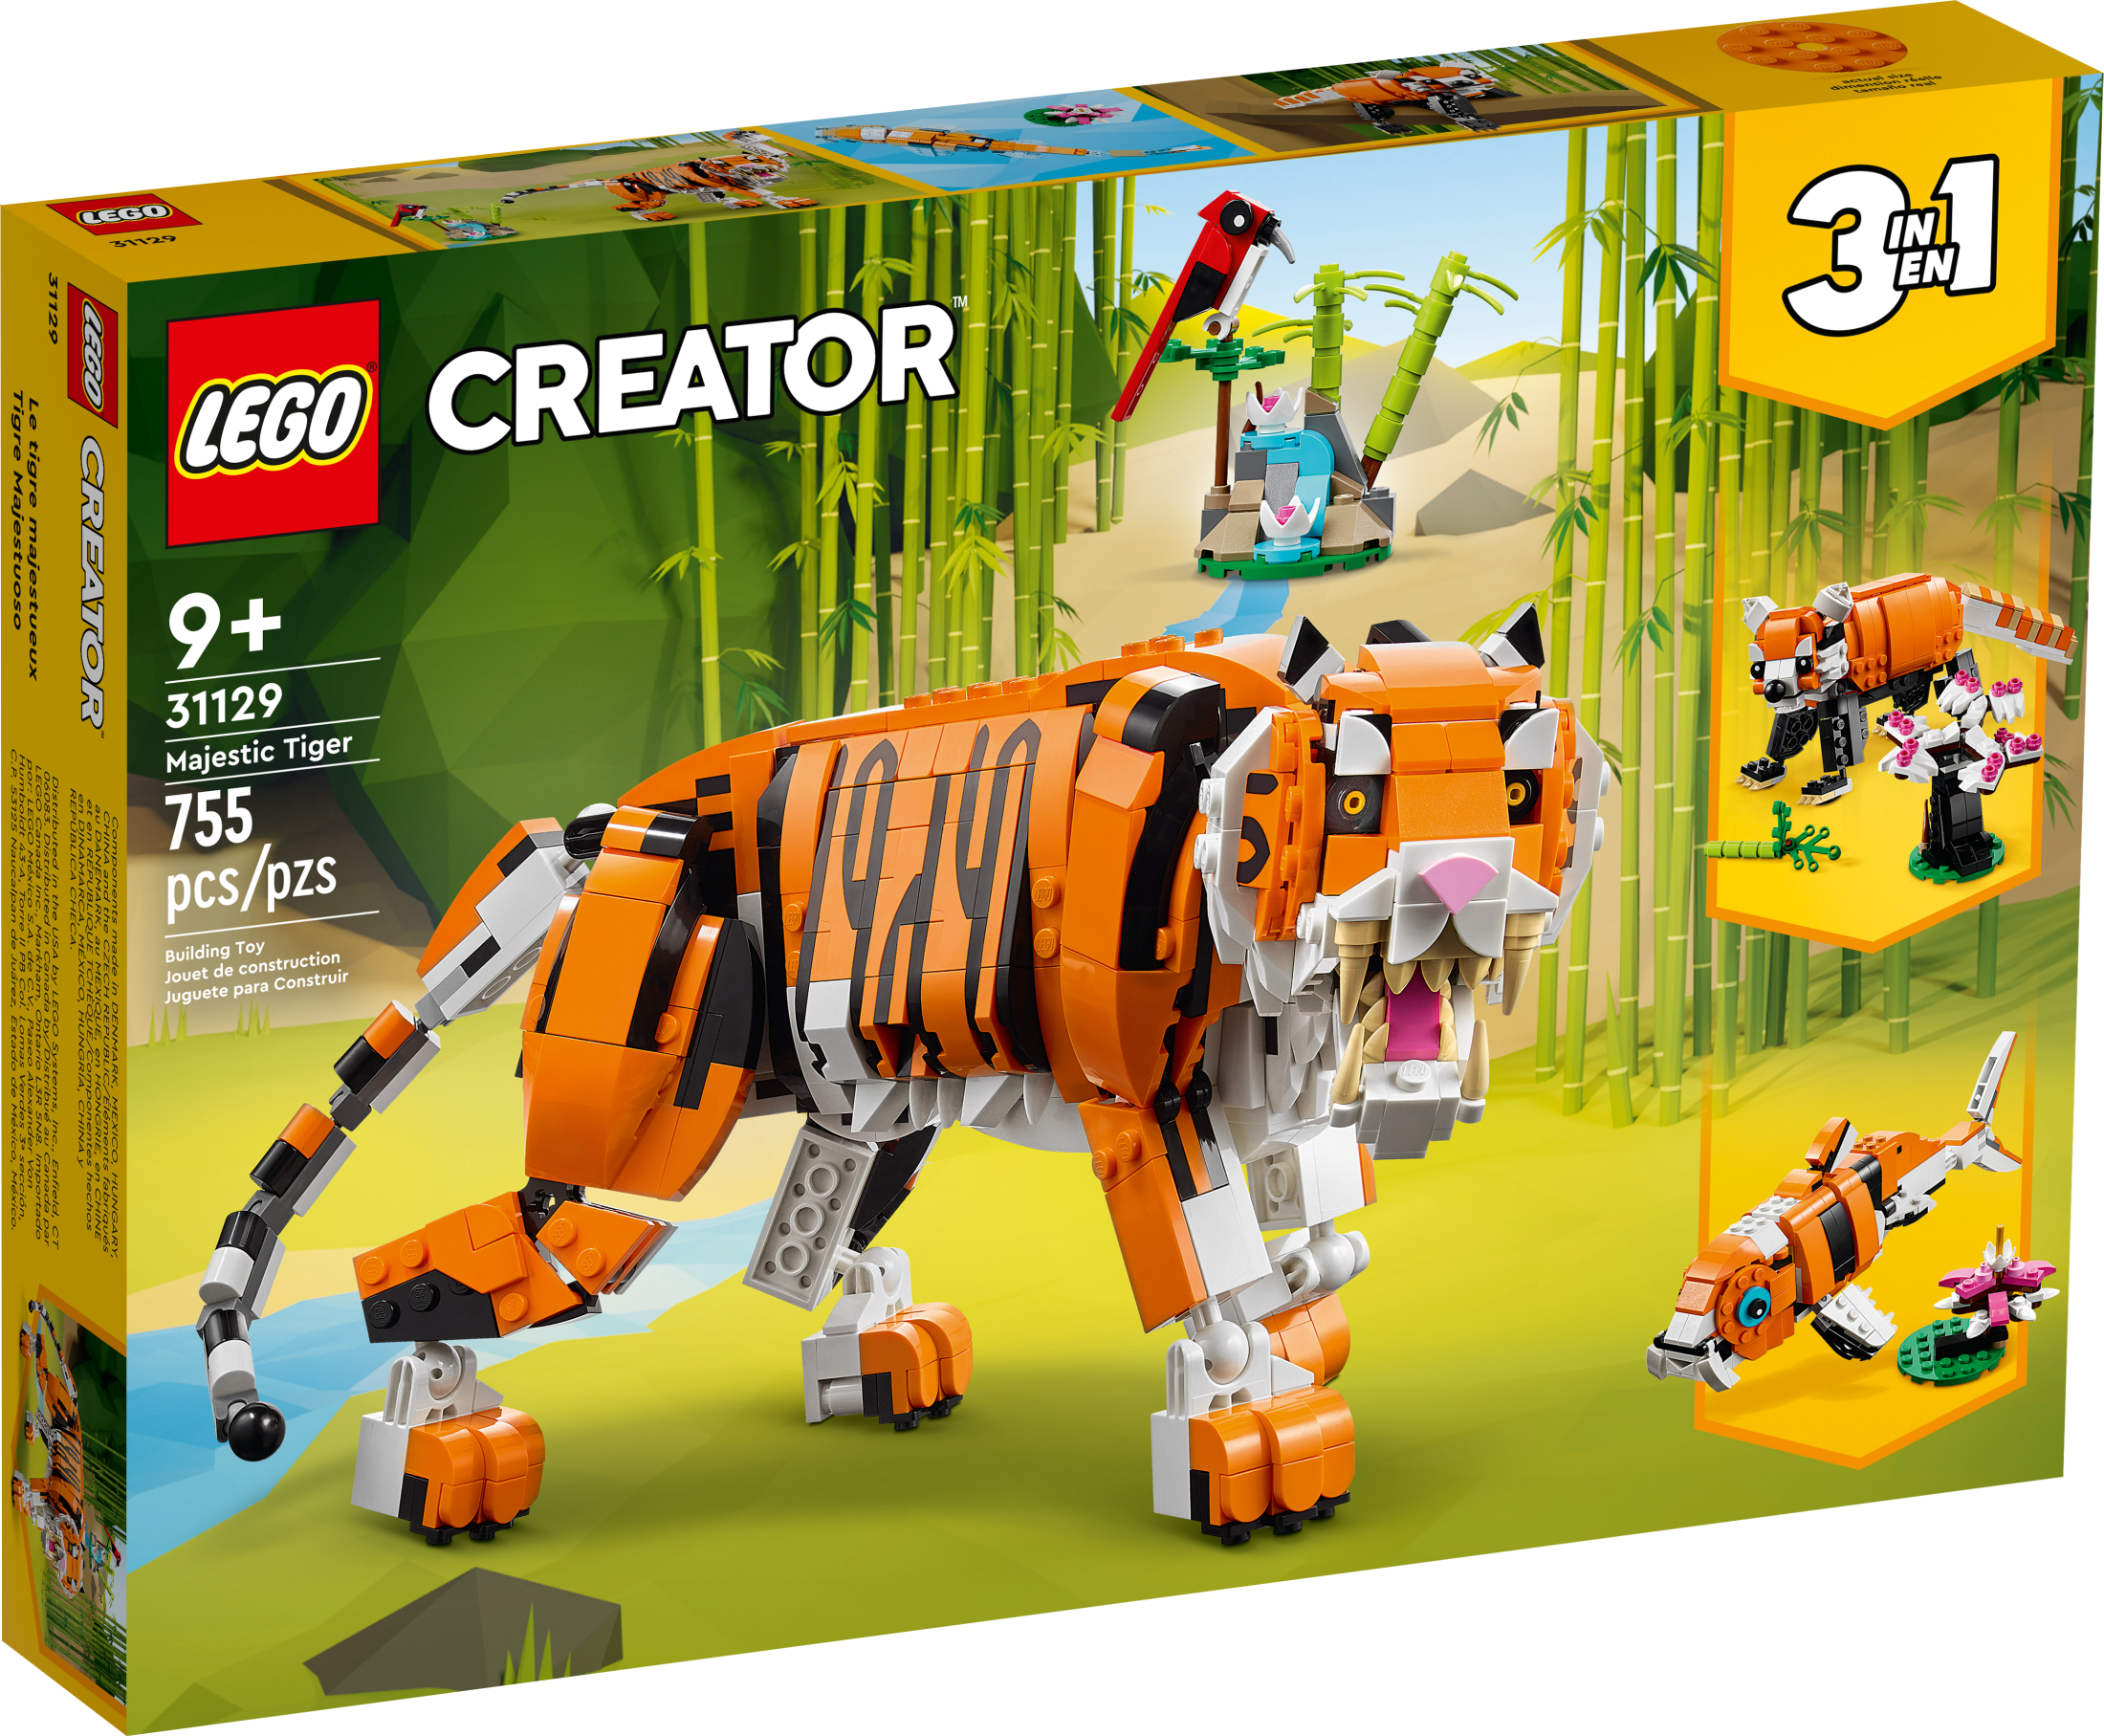 LEGO Creator 3 in 1 Majestic Tiger Building Set, Transforms from Tiger to Panda or Koi Fish Set, Animal Figures, Collectible Building Toy, Gifts for Kids, Boys & Girls 9 Plus Years Old, 31129 - image 4 of 9